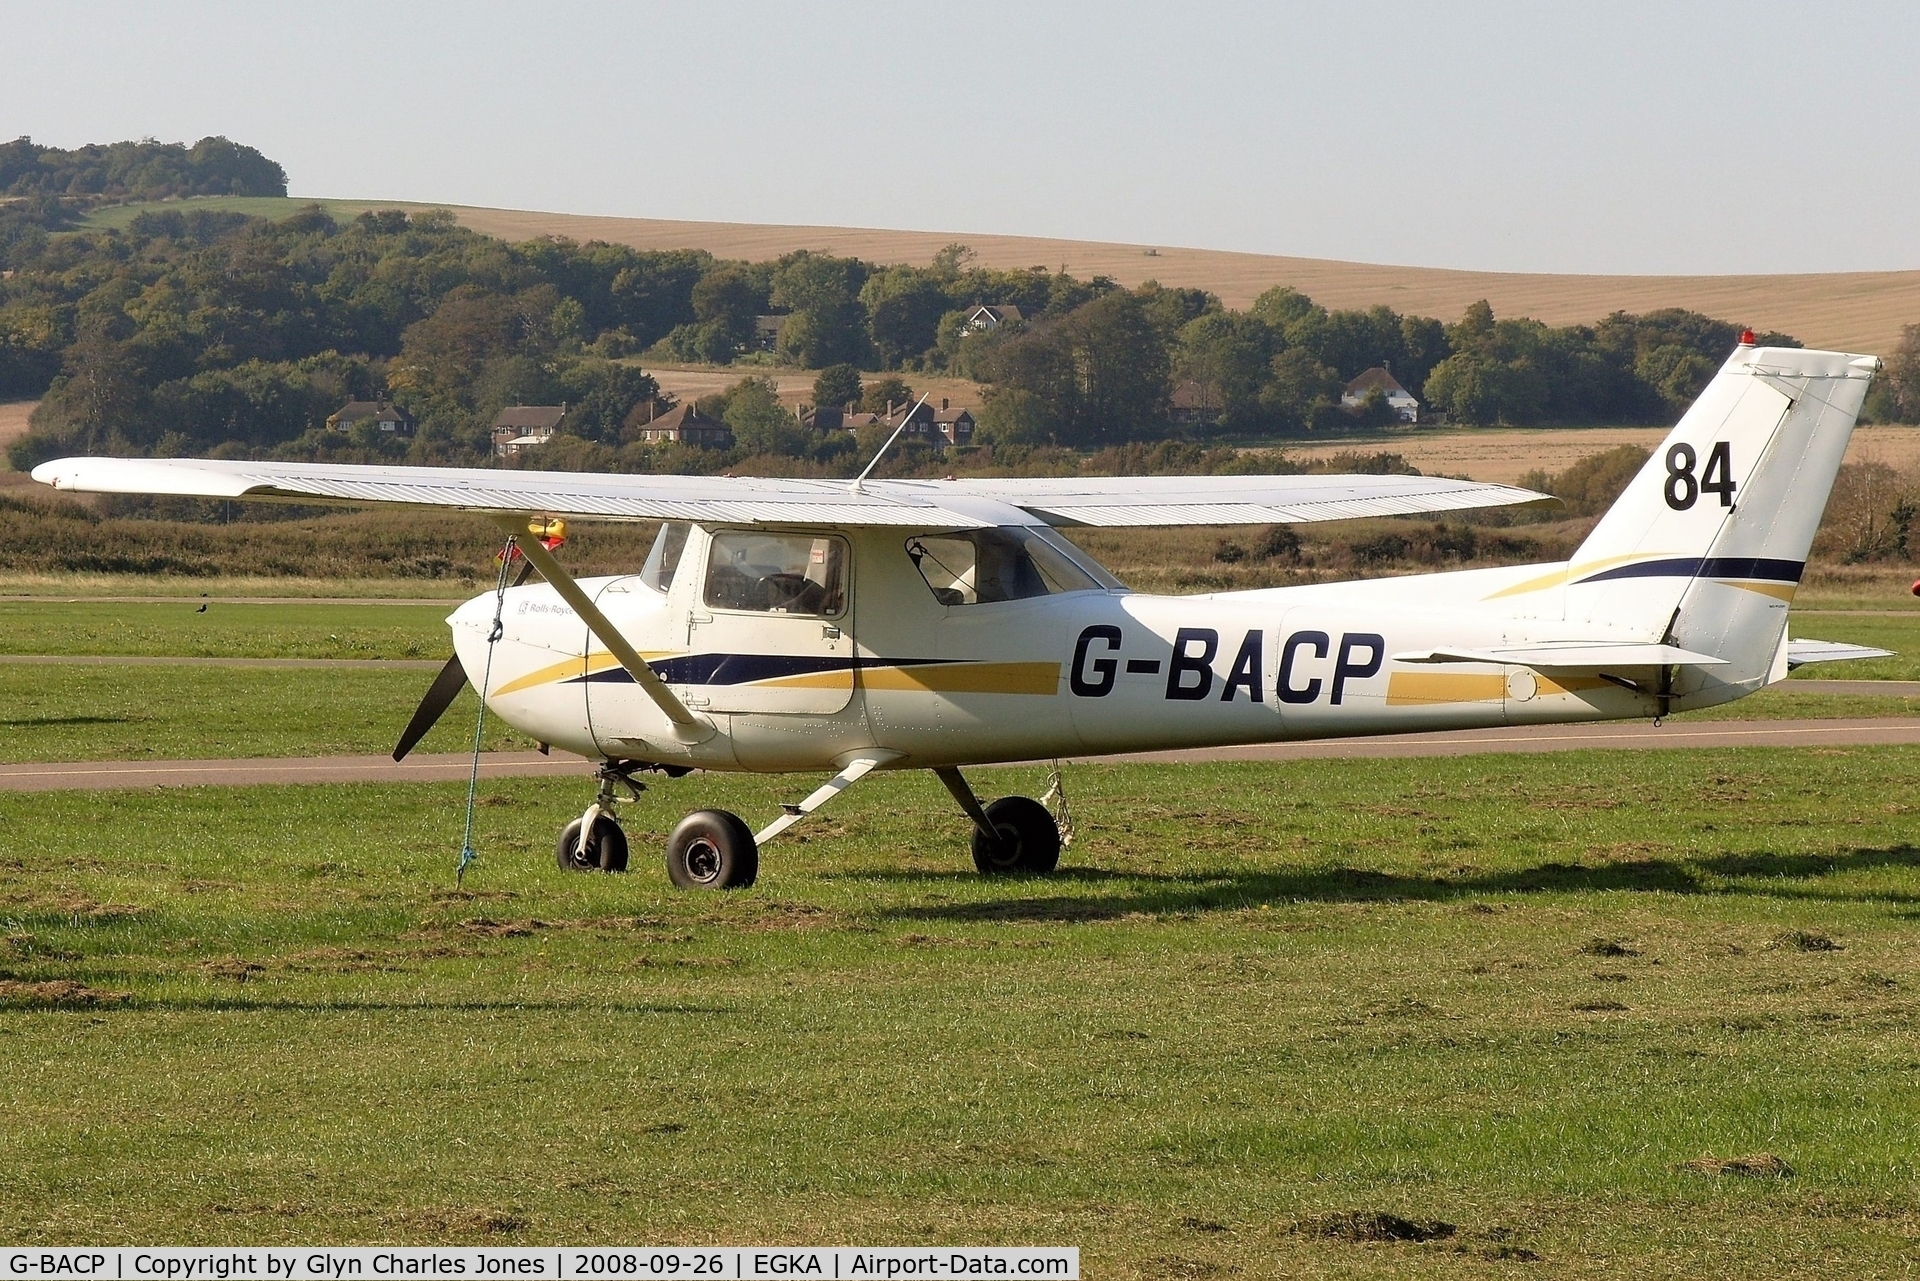 G-BACP, 1972 Reims FRA150L Aerobat C/N 0164, Owned by Aim High Flying Group. Sporting '84'.